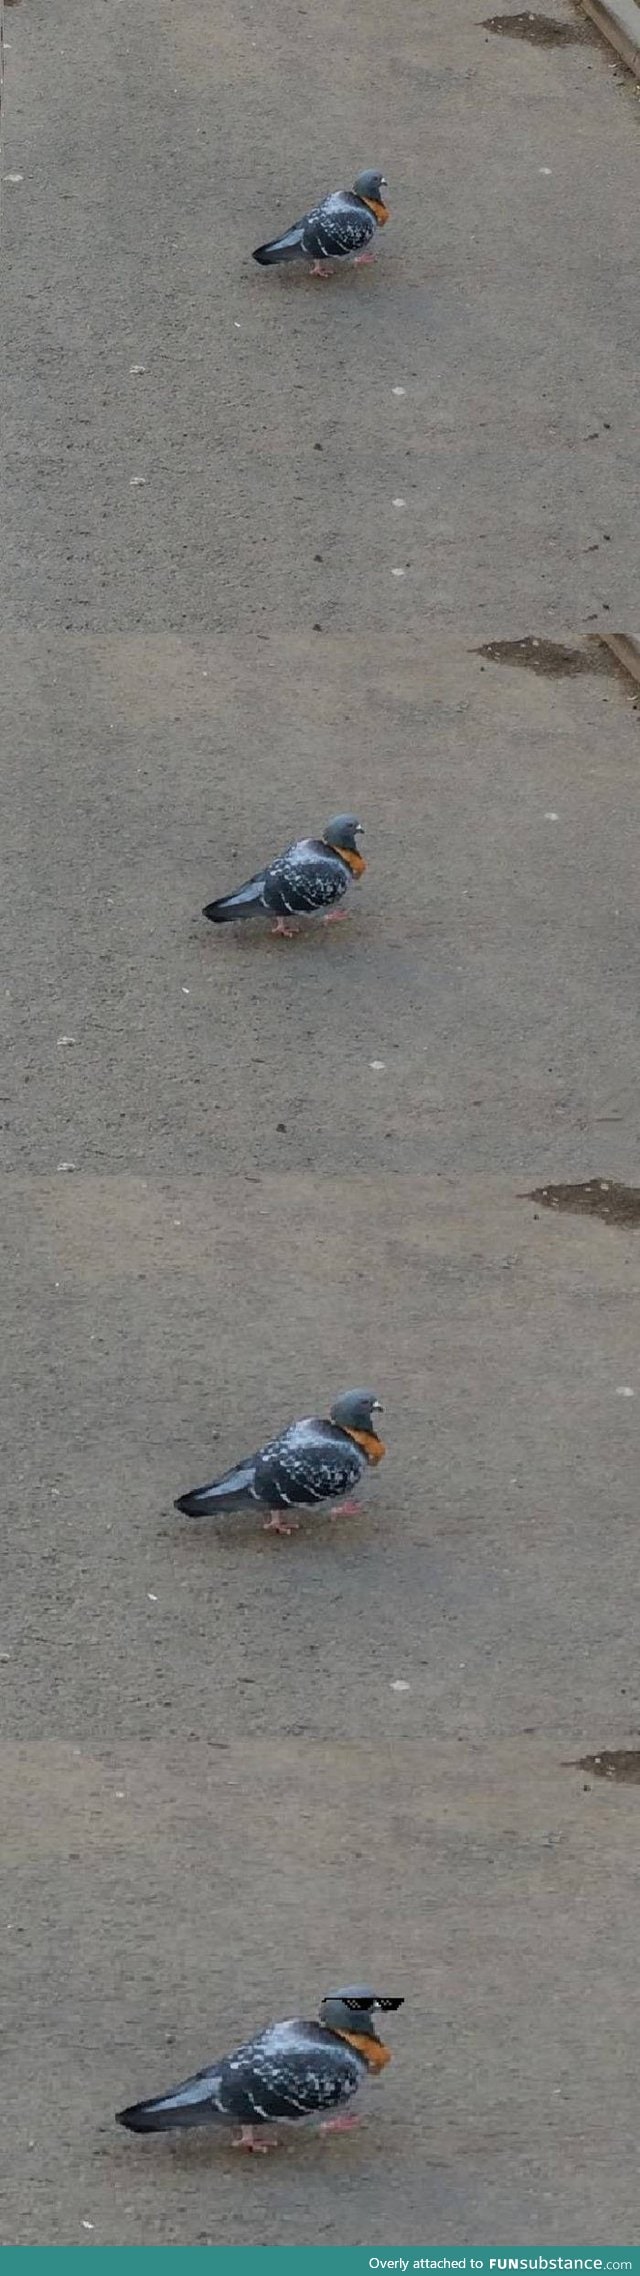 This pigeon was walking around with a crust of bread around the neck